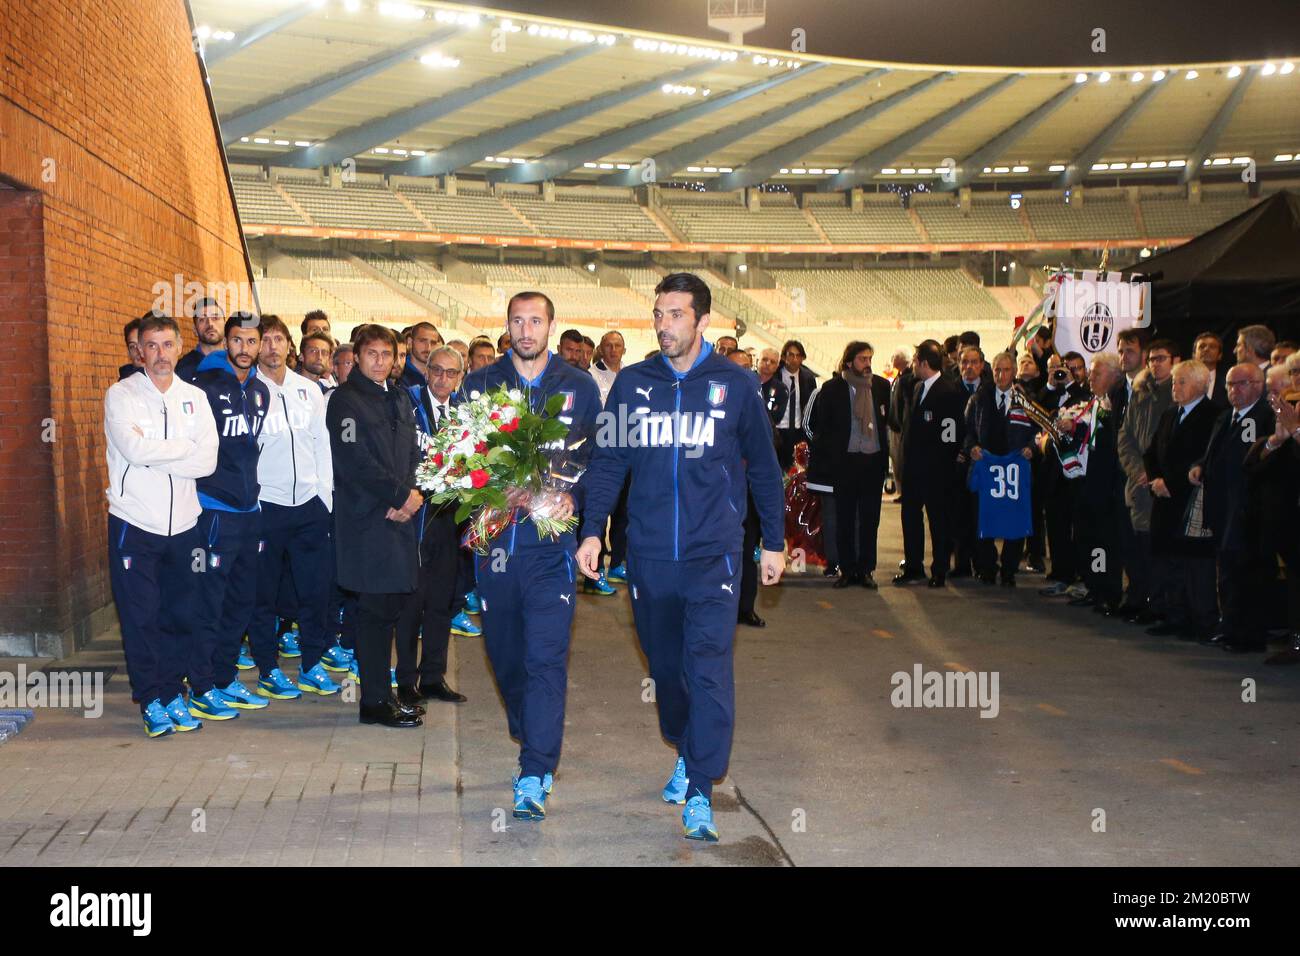 20151112 - BRUSSELS, BELGIUM: Italy's defender Giorgio Chiellini and Italy's goalkeeper Gianluigi Buffon put down flowers during a tribute to commemorate the Heysel stadium disaster 30 years ago, in Brussels former Heysel stadium, now called King Baudouin stadium (Stade Roi Baudouin - Koning Boudewijnsatdion), Thursday 12 November 2015. On 29 May 1985, 39 persons because of clashes between supporters and the collapse of a part of a stand, before the start of the European Cup final between Liverpool and Juventus. Red Devils Belgian national team is playing a friendly games against Italy tomorro Stock Photo